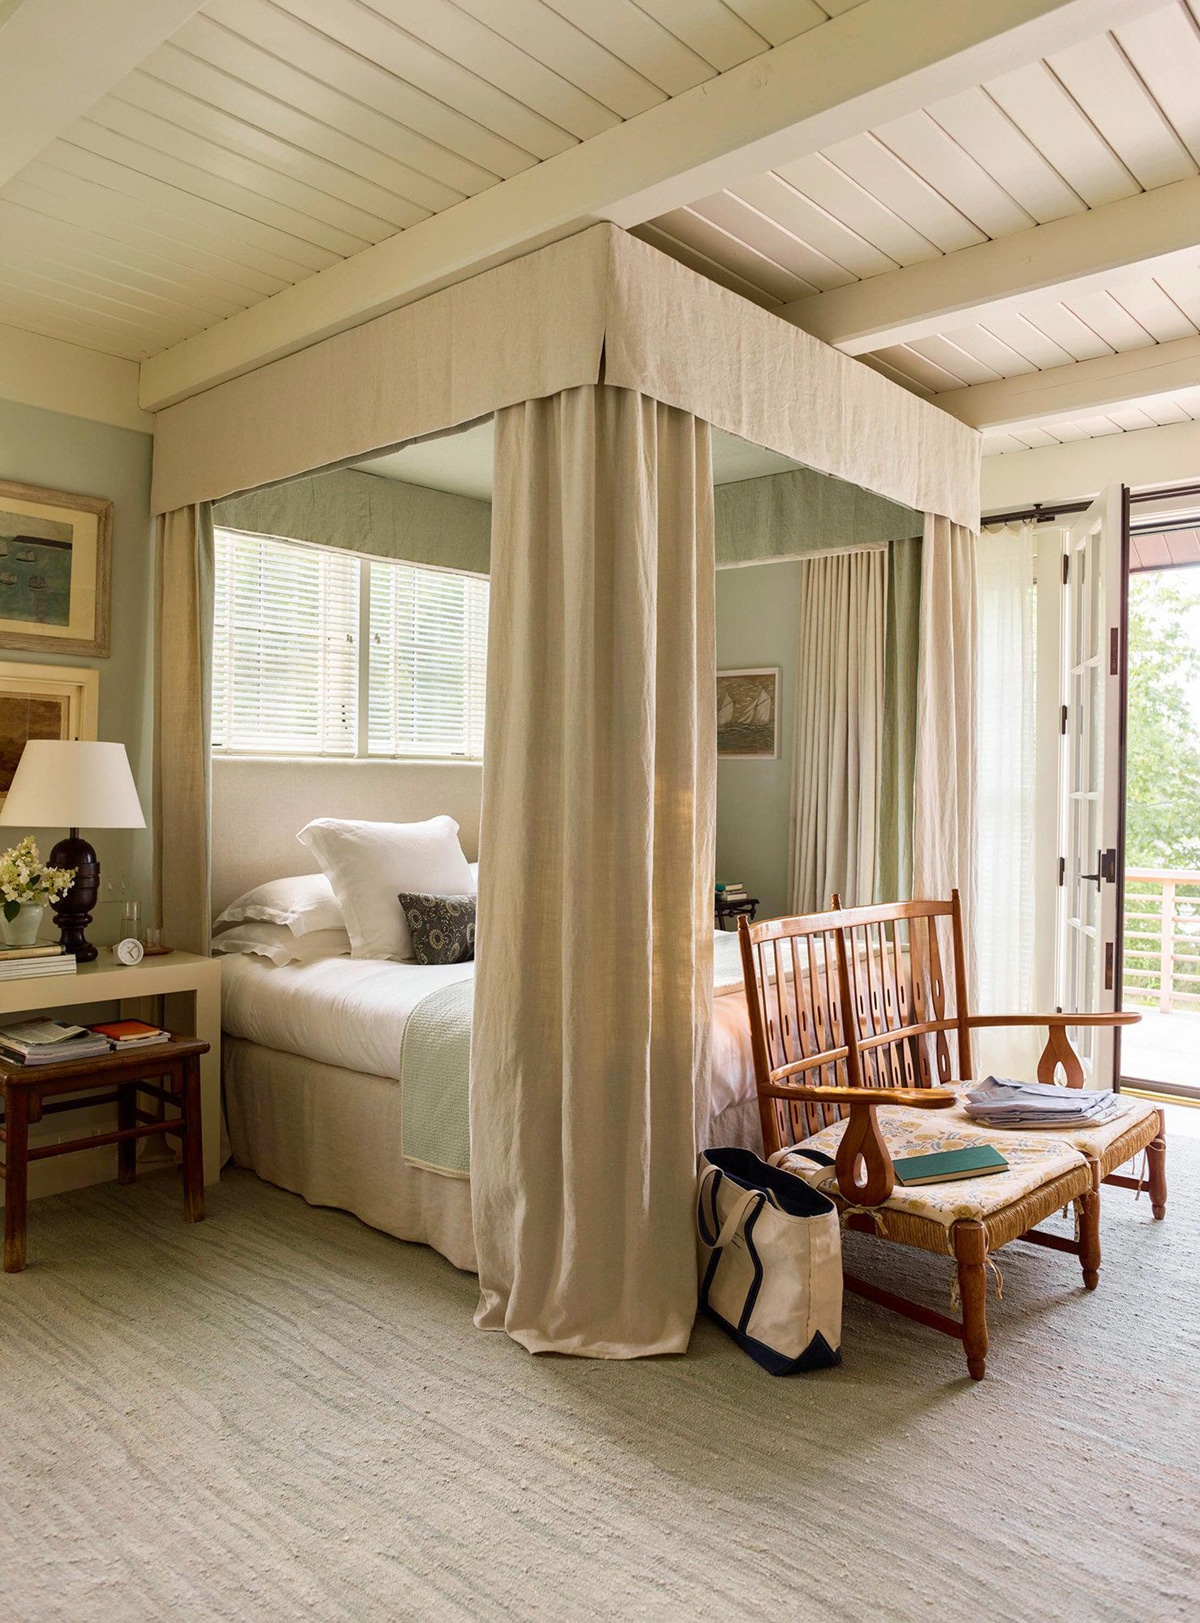 luxurious four posted fabric paneled bed in this maine cottage vacation home | design by gil schafer on coco kelley